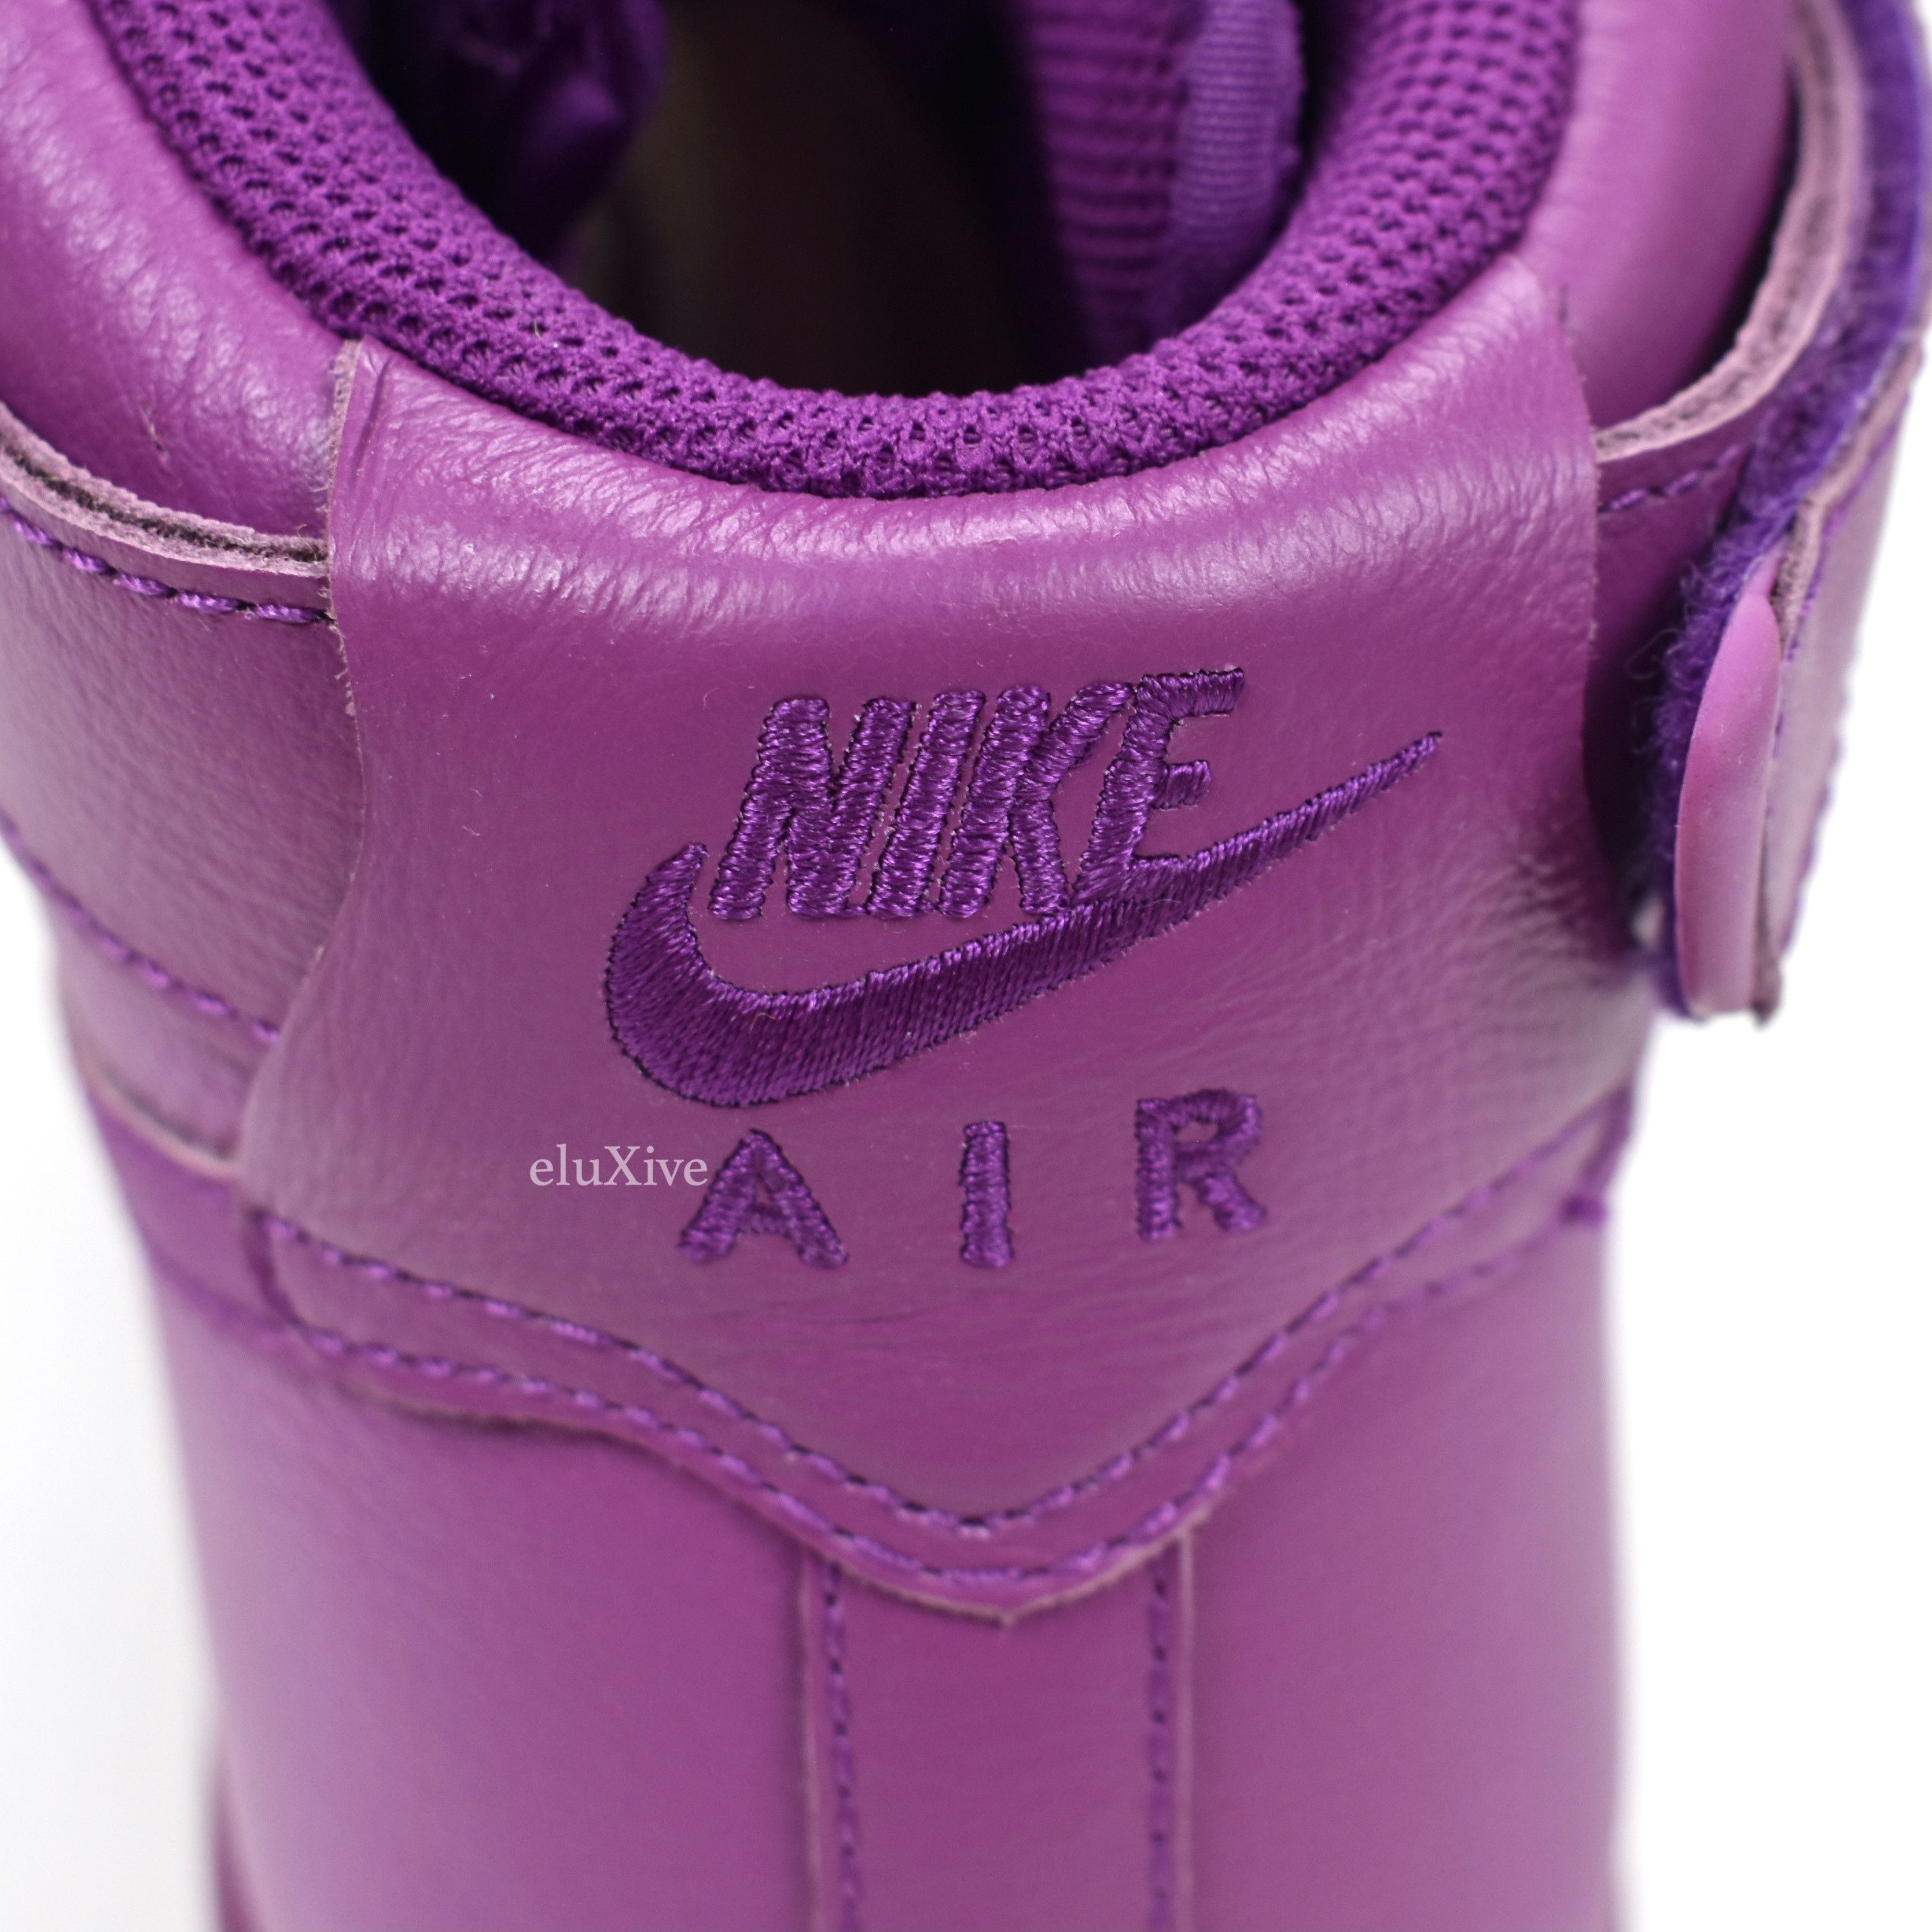 Nike Nike Air Force 1 High Color Pack 2008 Red Plum DS Size US 10.5 / EU 43-44 - 6 Thumbnail